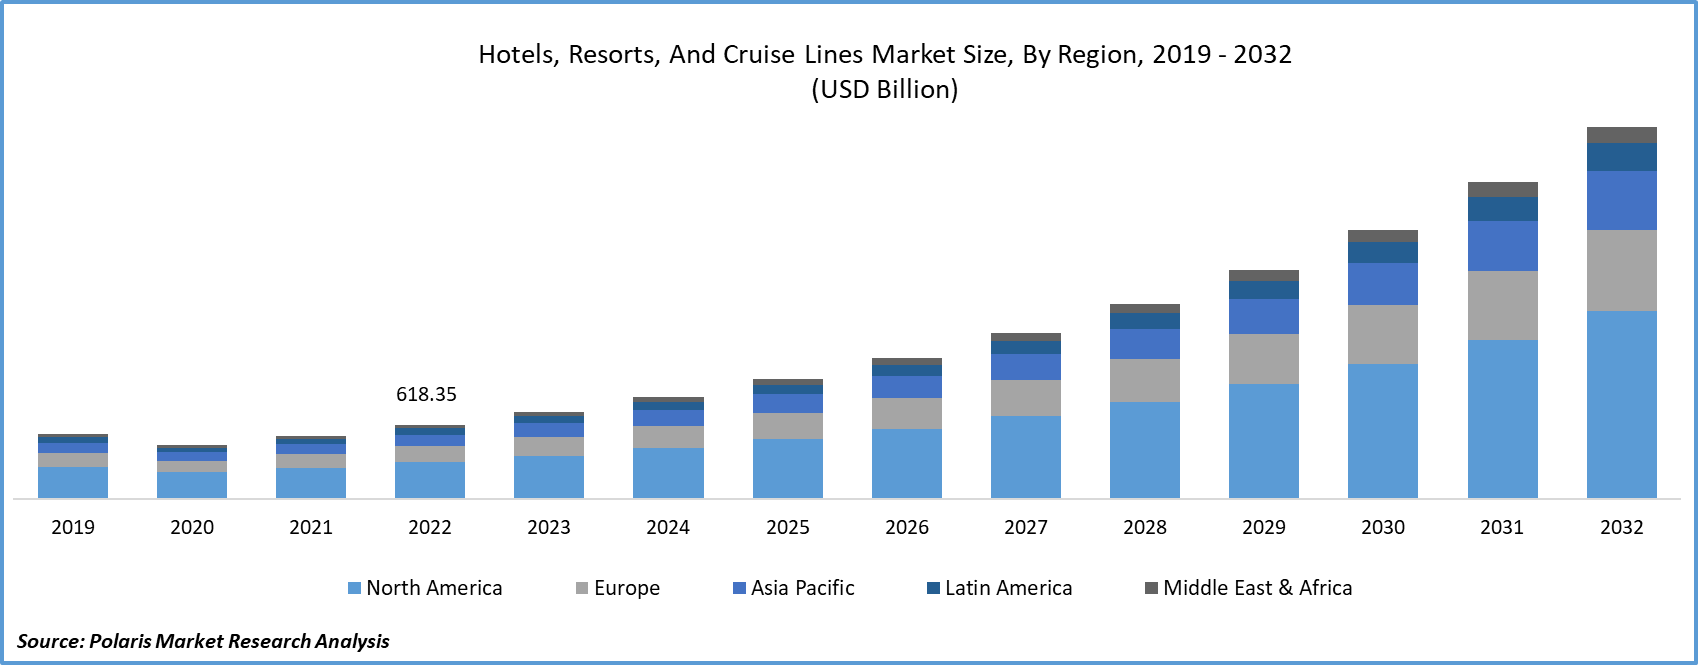 Hotels, Resorts, and Cruise Lines Market Size